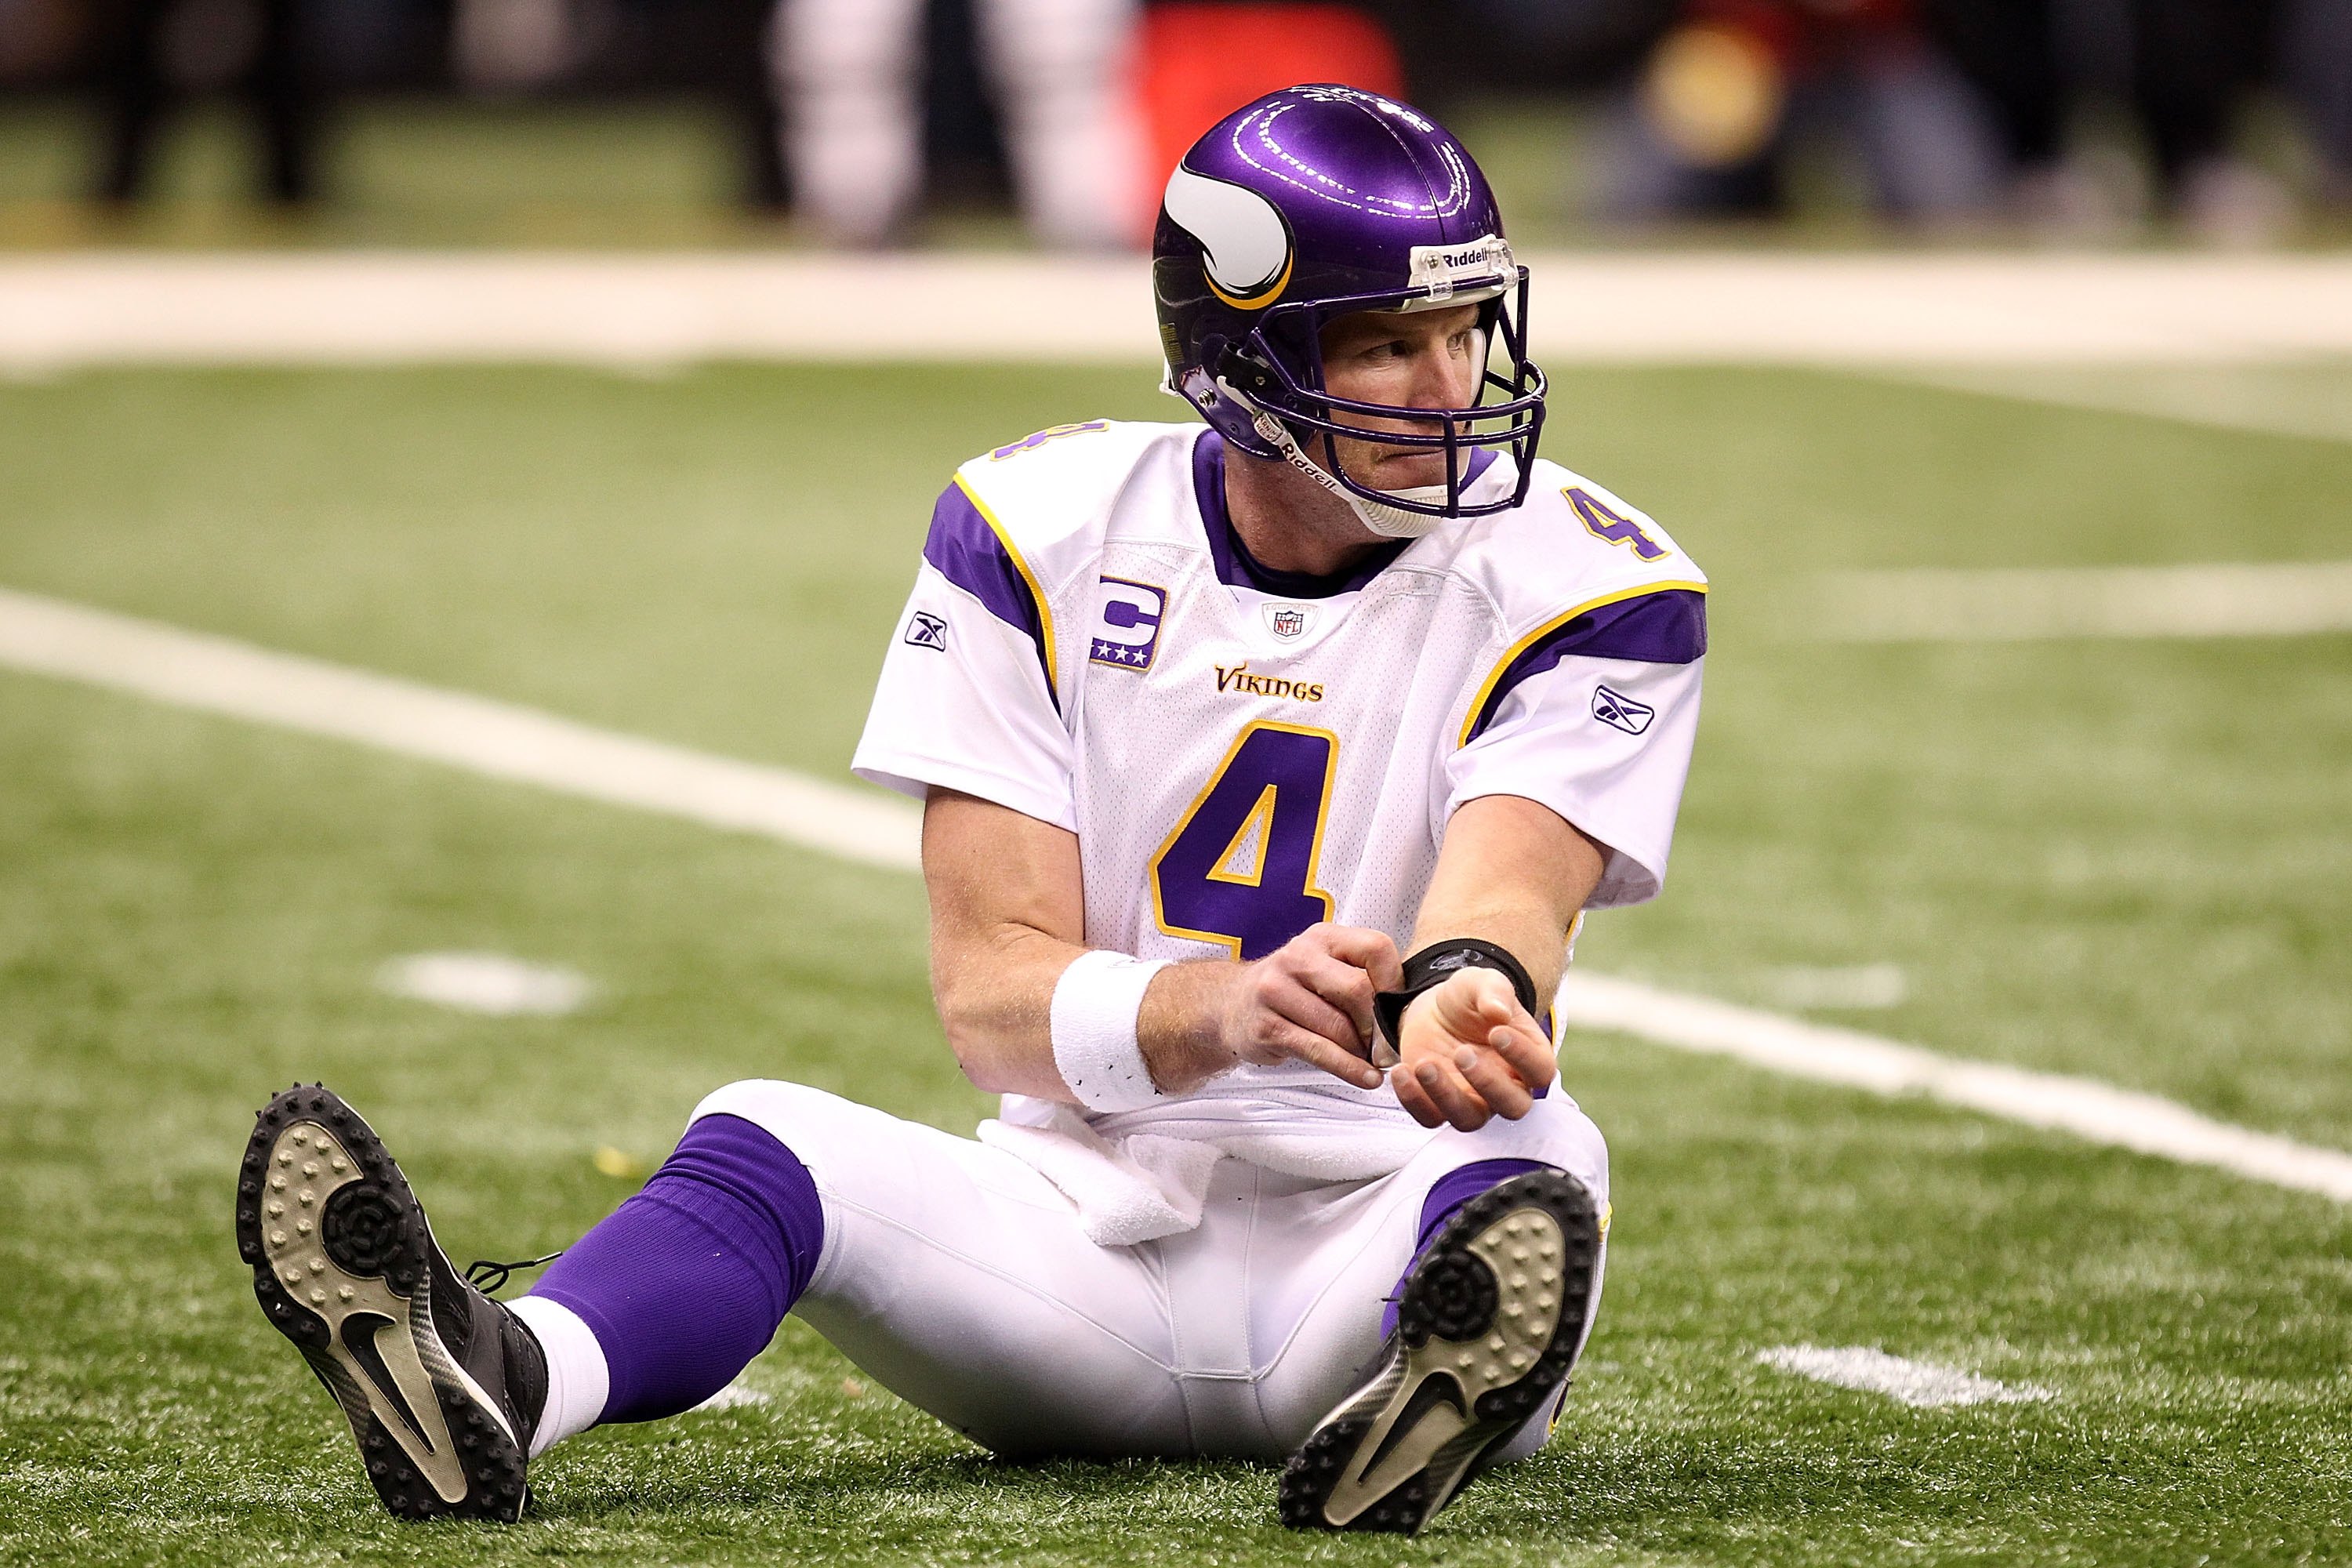 NEW ORLEANS - JANUARY 24:  Brett Favre #4 of the Minnesota Vikings sits on the turf after getting knocked down on a play against the New Orleans Saints during the NFC Championship Game at the Louisana Superdome on January 24, 2010 in New Orleans, Louisian